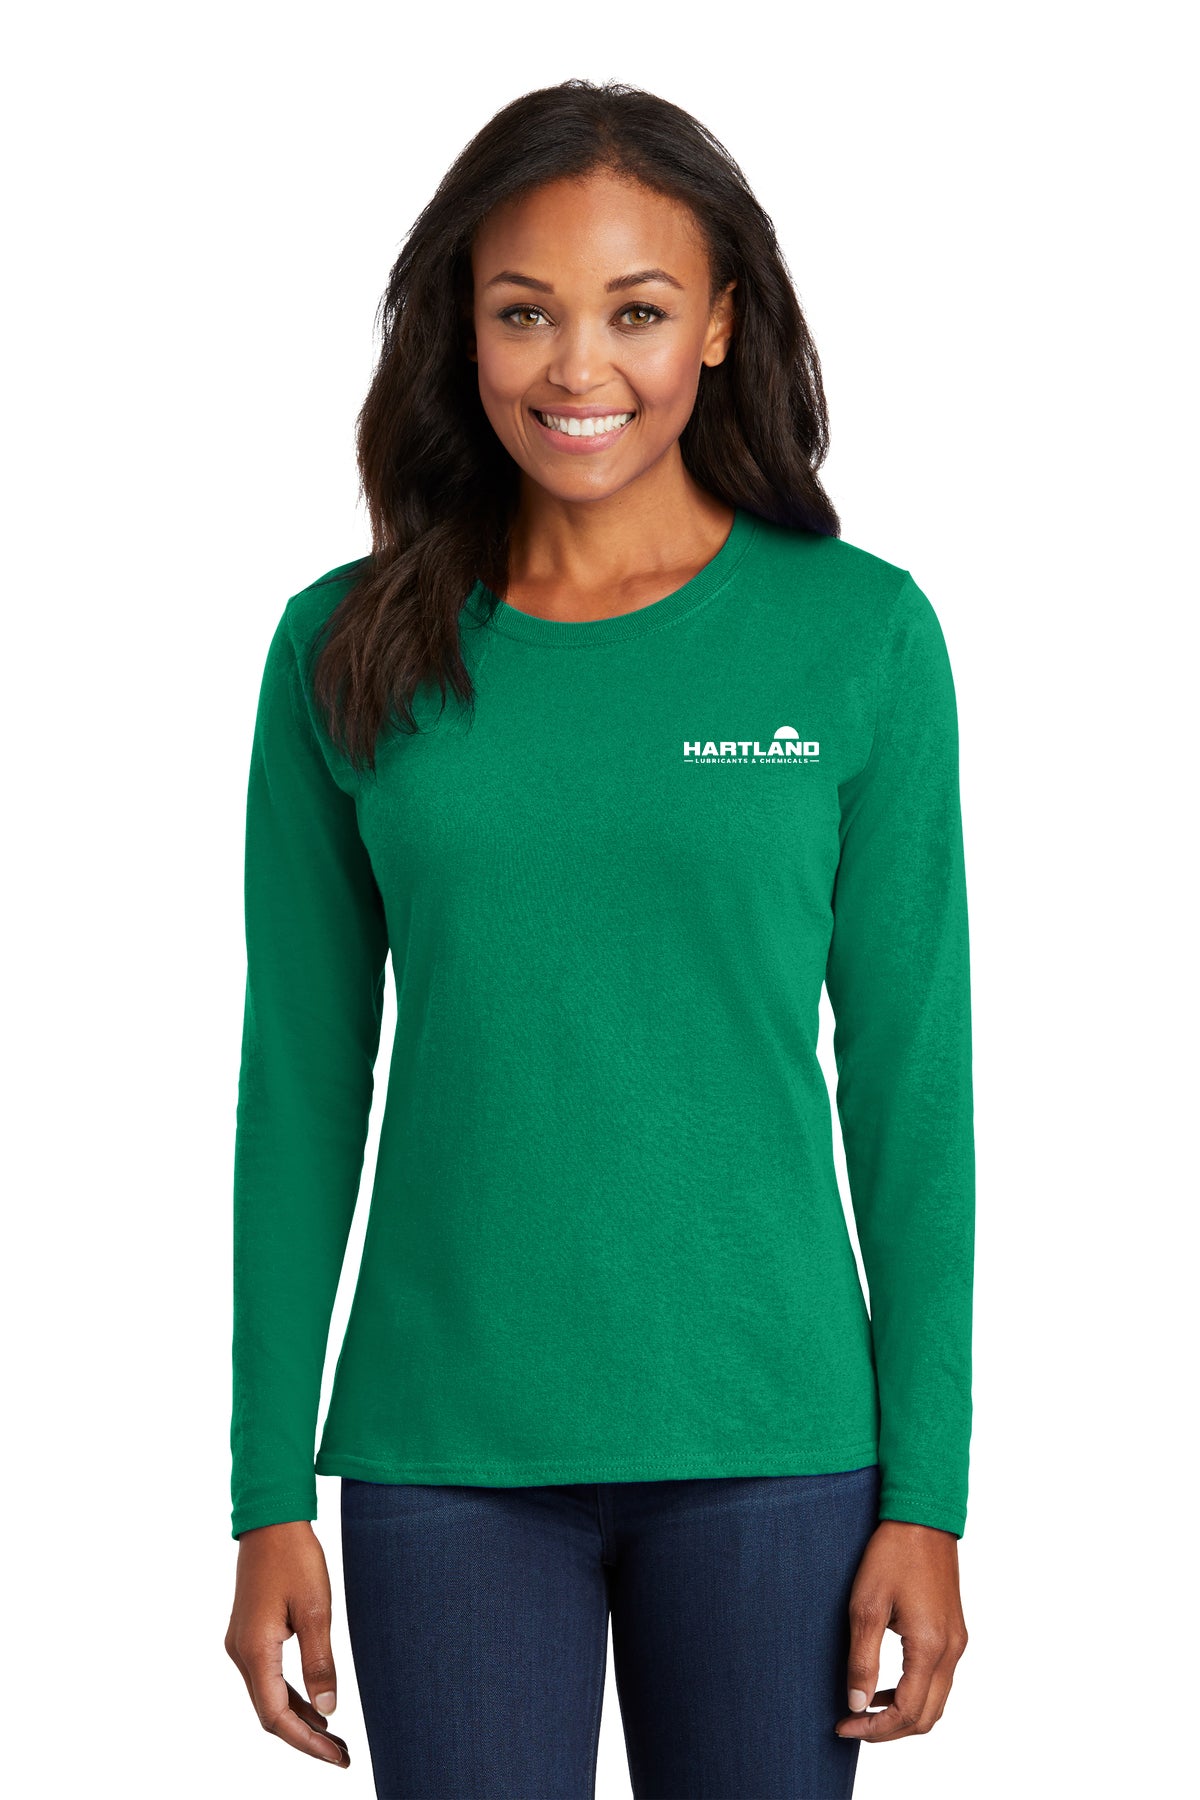 Hartland Lubricants and Chemicals Ladies Long Sleeve – Multiple Colors